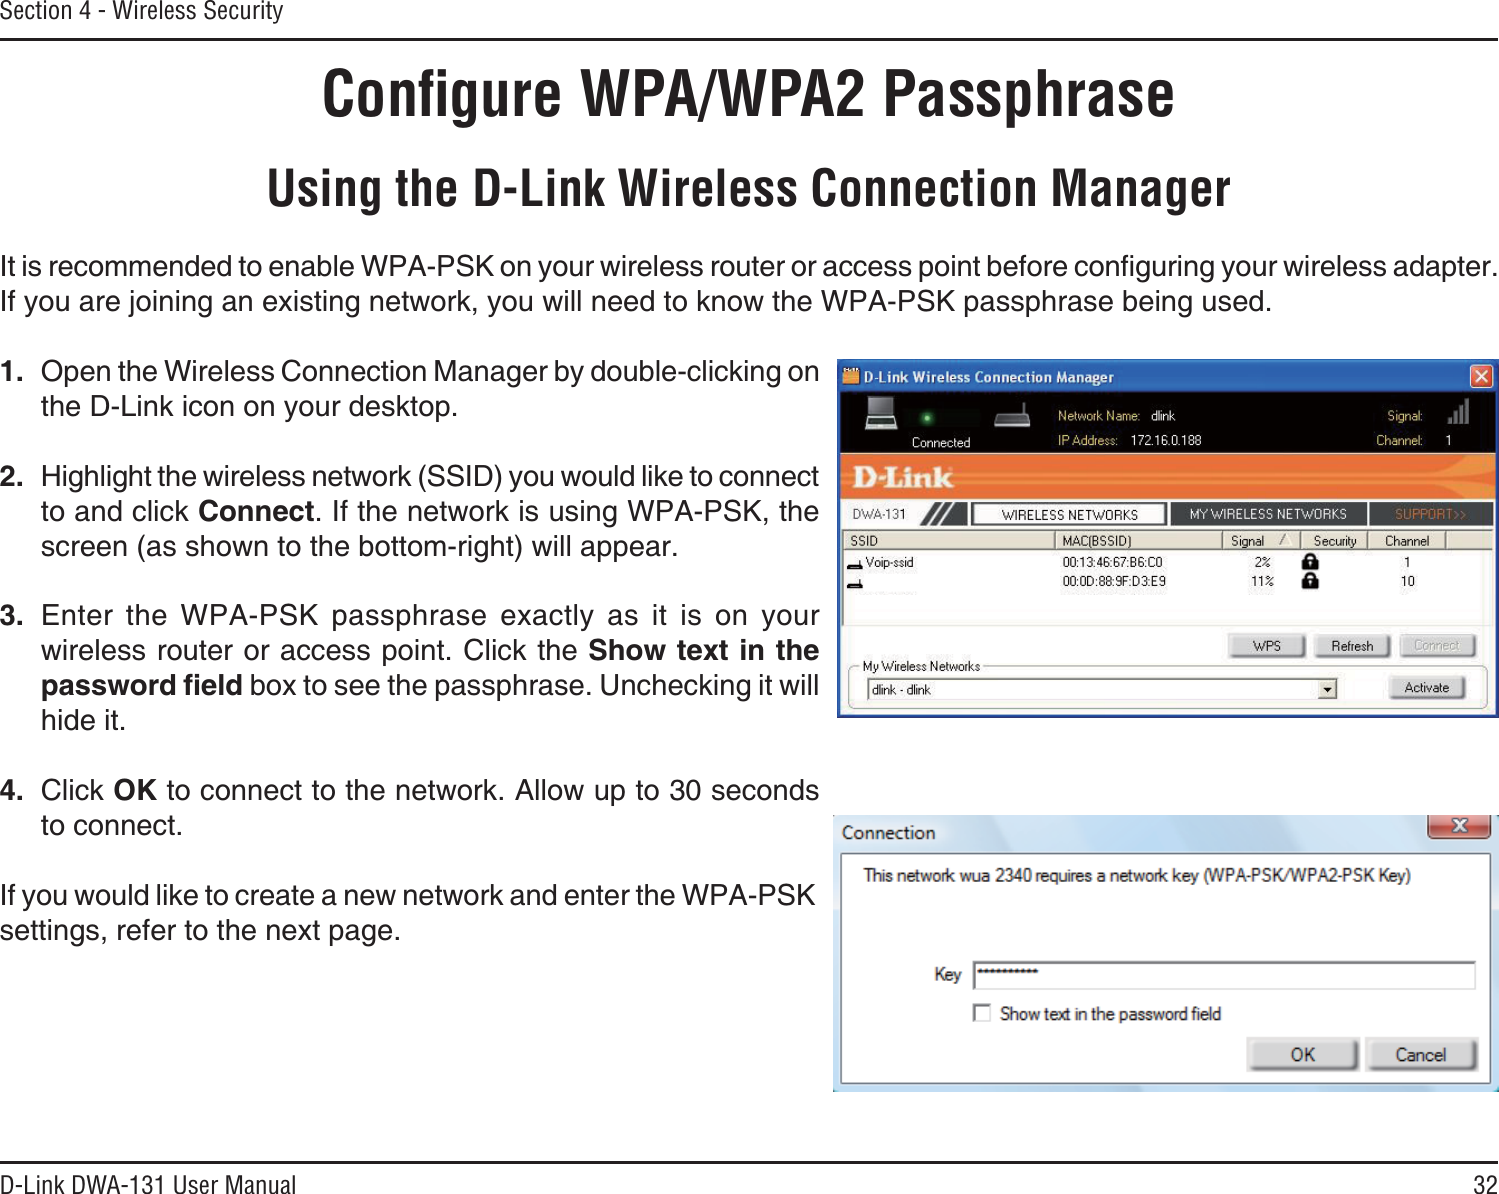 32D-Link DWA-131 User ManualSection 4 - Wireless SecurityConﬁgure WPA/WPA2 PassphraseUsing the D-Link Wireless Connection Manager+VKUTGEQOOGPFGFVQGPCDNG92#25-QP[QWTYKTGNGUUTQWVGTQTCEEGUURQKPVDGHQTGEQPſIWTKPI[QWTYKTGNGUUCFCRVGTIf you are joining an existing network, you will need to know the WPA-PSK passphrase being used.1. Open the Wireless Connection Manager by double-clicking on the D-Link icon on your desktop. 2. Highlight the wireless network (SSID) you would like to connect to and click Connect. If the network is using WPA-PSK, the screen (as shown to the bottom-right) will appear. 3. Enter the WPA-PSK passphrase exactly as it is on your wireless router or access point. Click the Show text in the RCUUYQTFſGNF box to see the passphrase. Unchecking it will hide it.4. Click OK to connect to the network. Allow up to 30 seconds to connect.If you would like to create a new network and enter the WPA-PSK settings, refer to the next page.